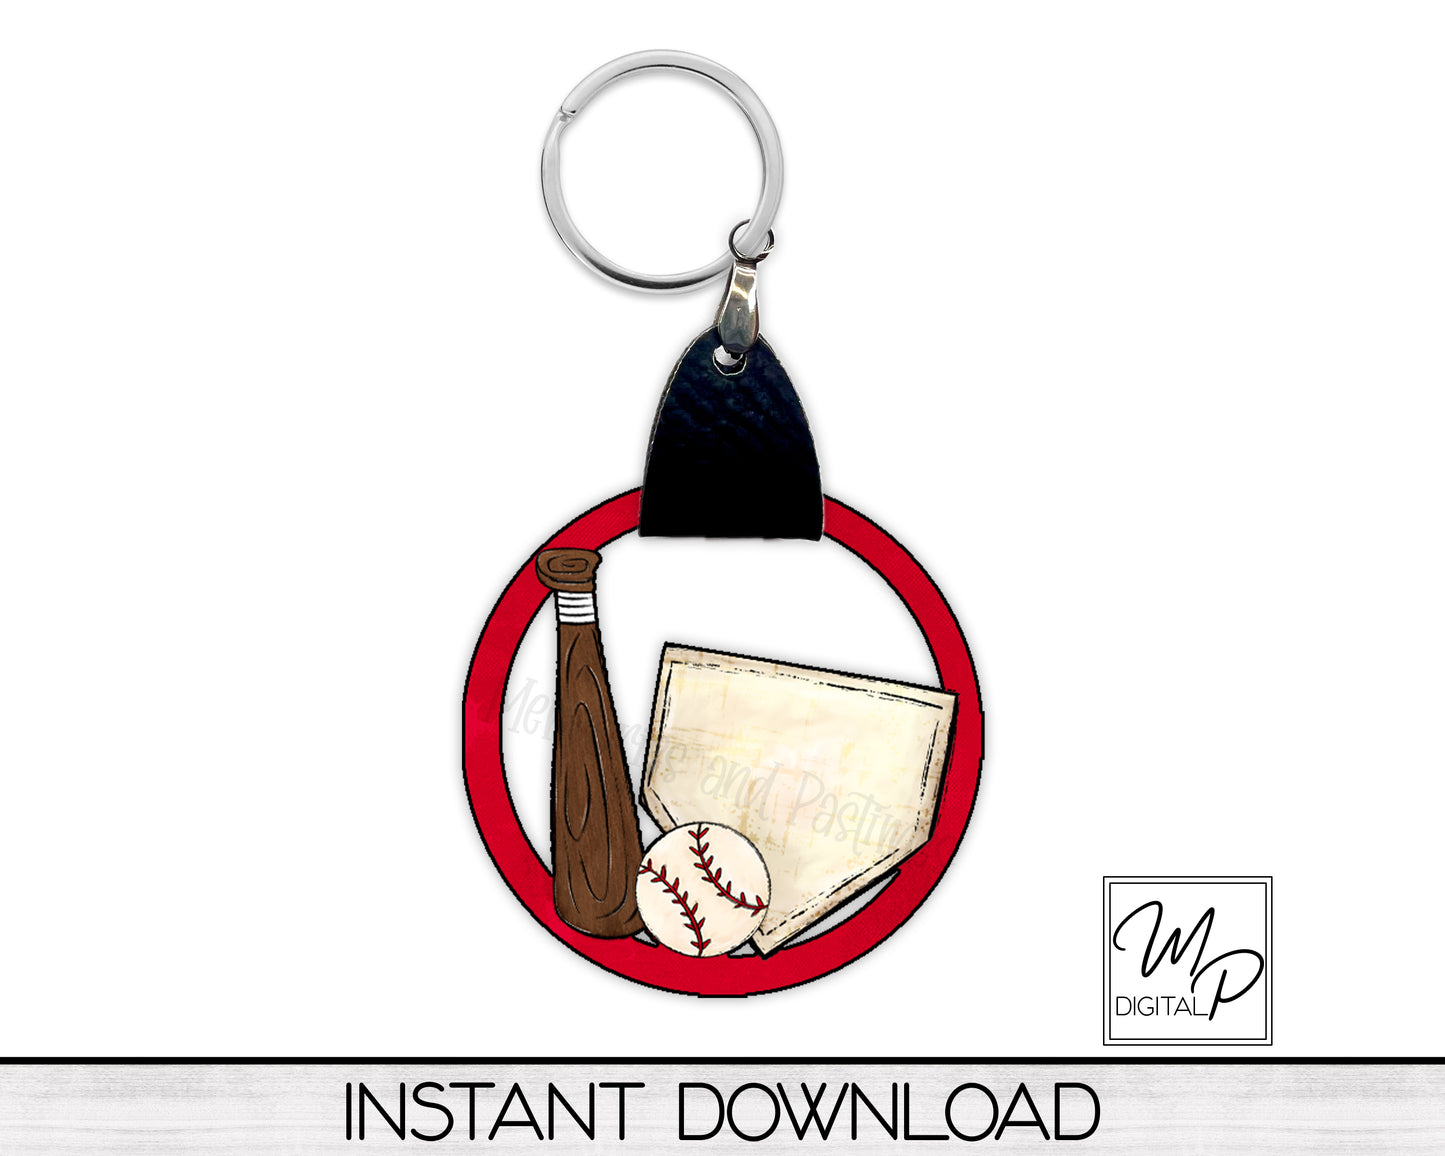 10 Team Colors Baseball PNG Design for Sublimation, Earring with Leather, Digital Download